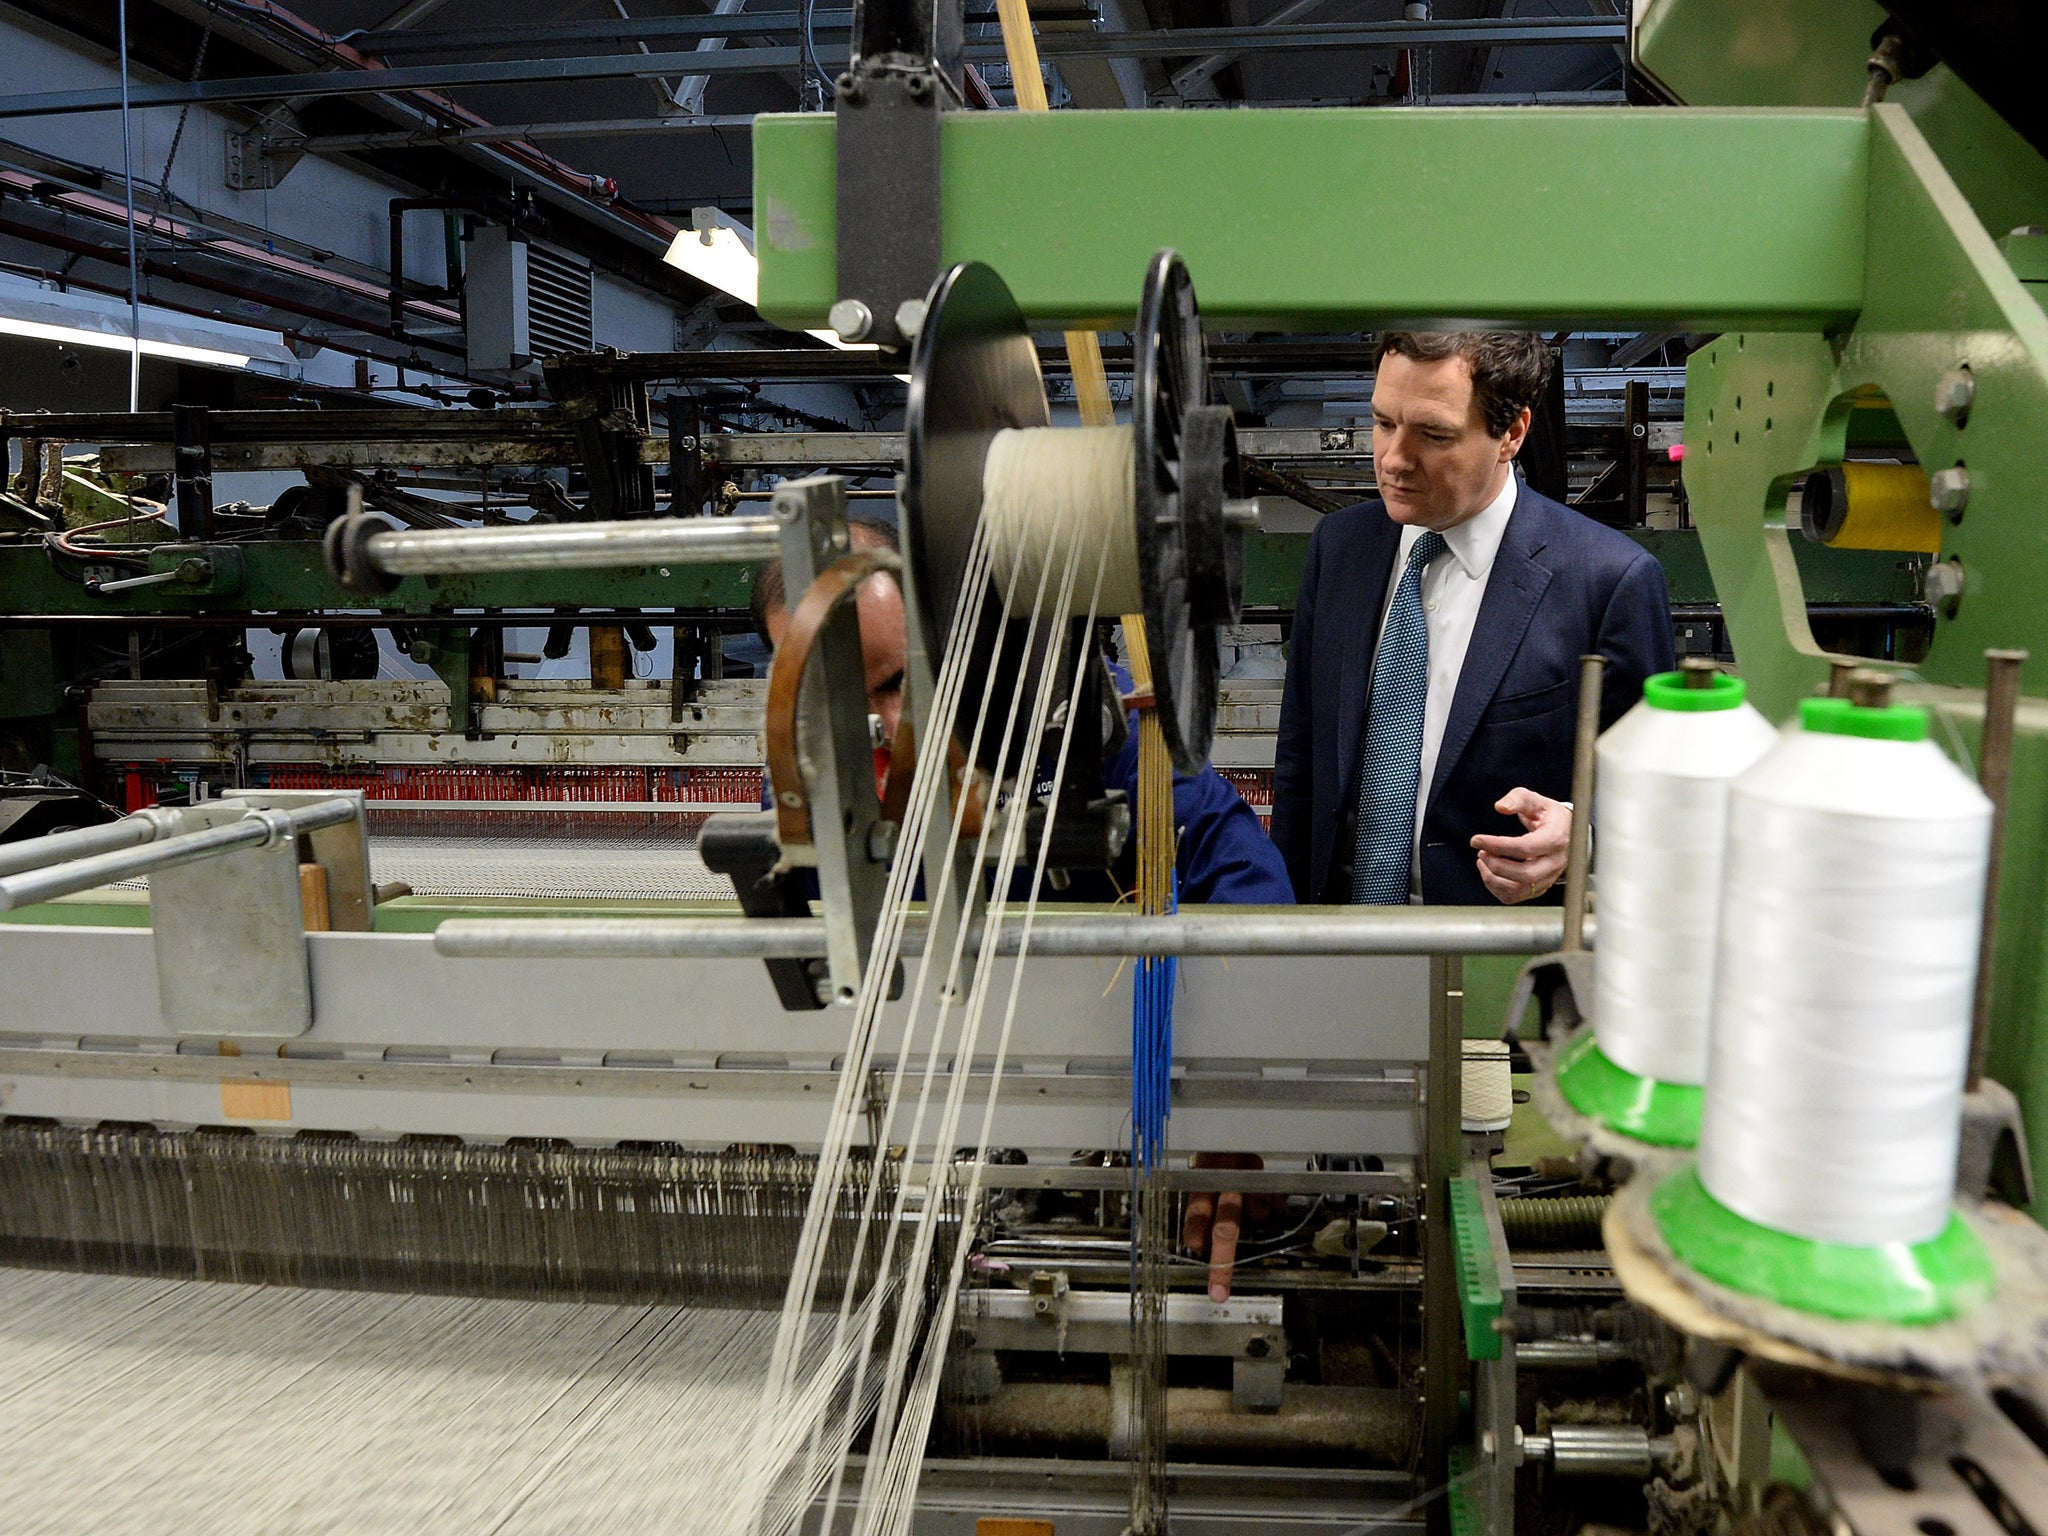 George Osborne during a visit to AW Hainsworth and Sons textile manufacturer in October